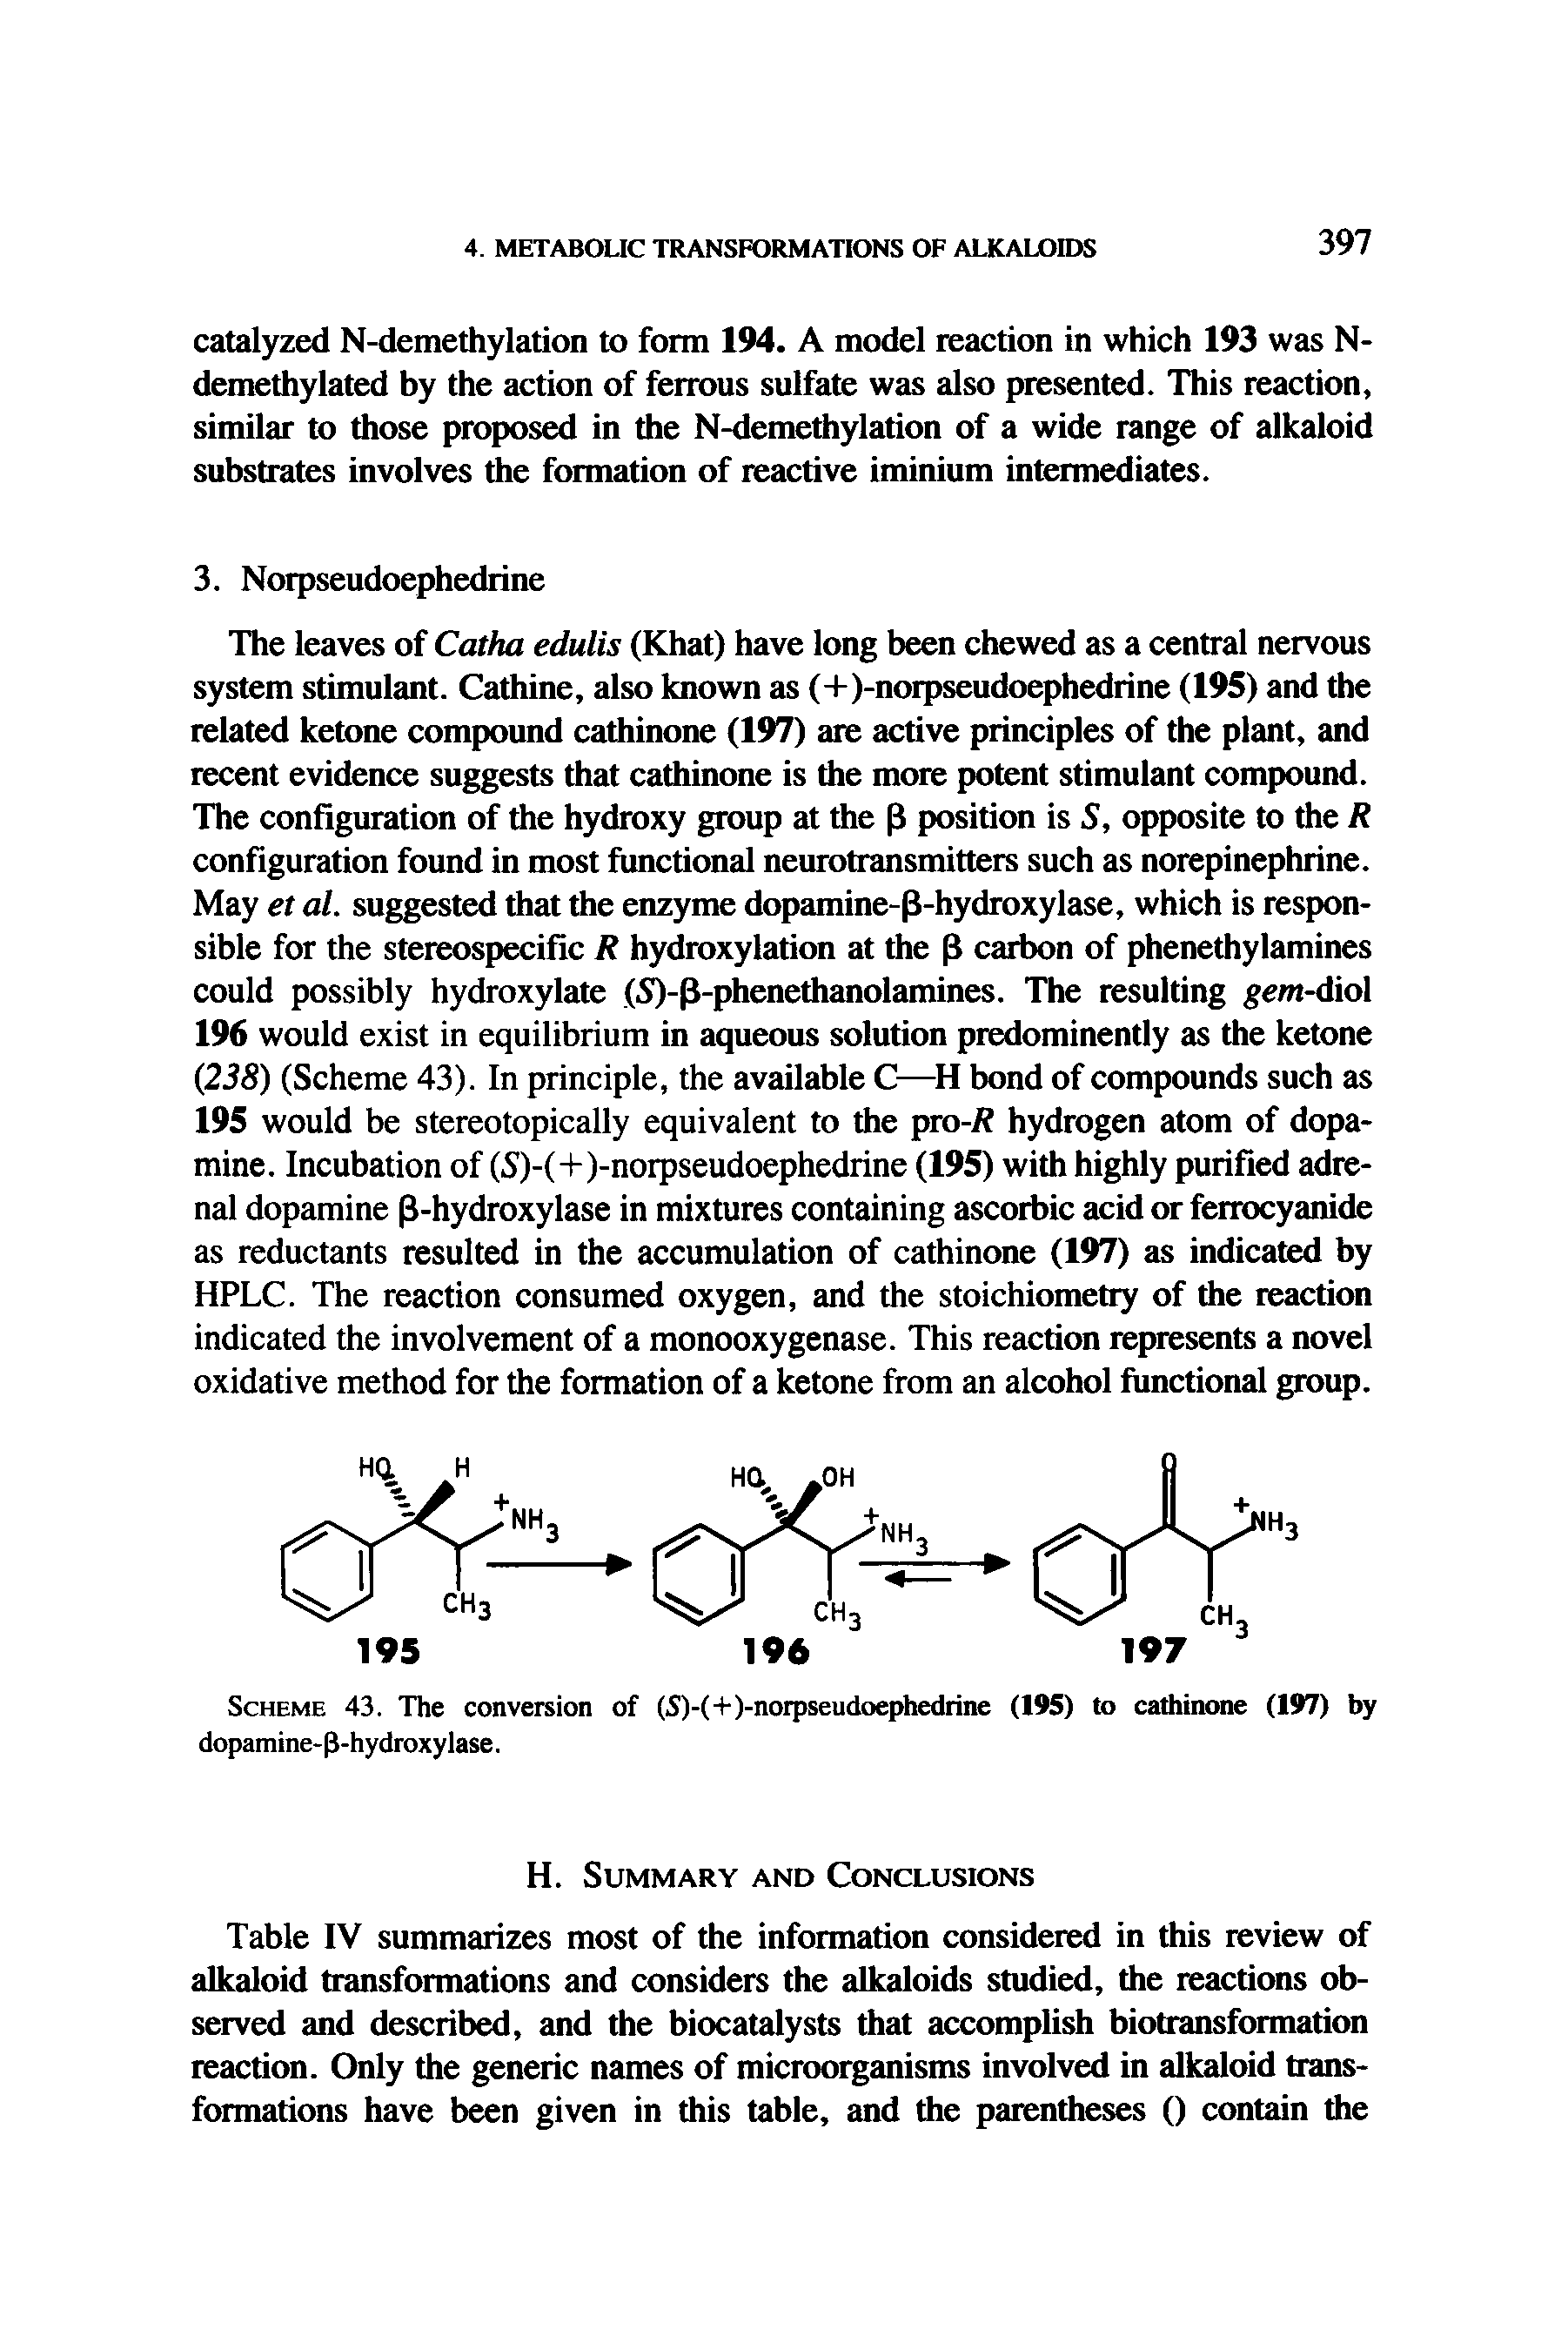 Table IV summarizes most of the information considered in this review of alkaloid transformations and considers the alkaloids studied, the reactions observed and described, and the biocatalysts that accomplish biotransformation reaction. Only the generic names of microorganisms involved in alkaloid transformations have been given in this table, and the parentheses () contain the...